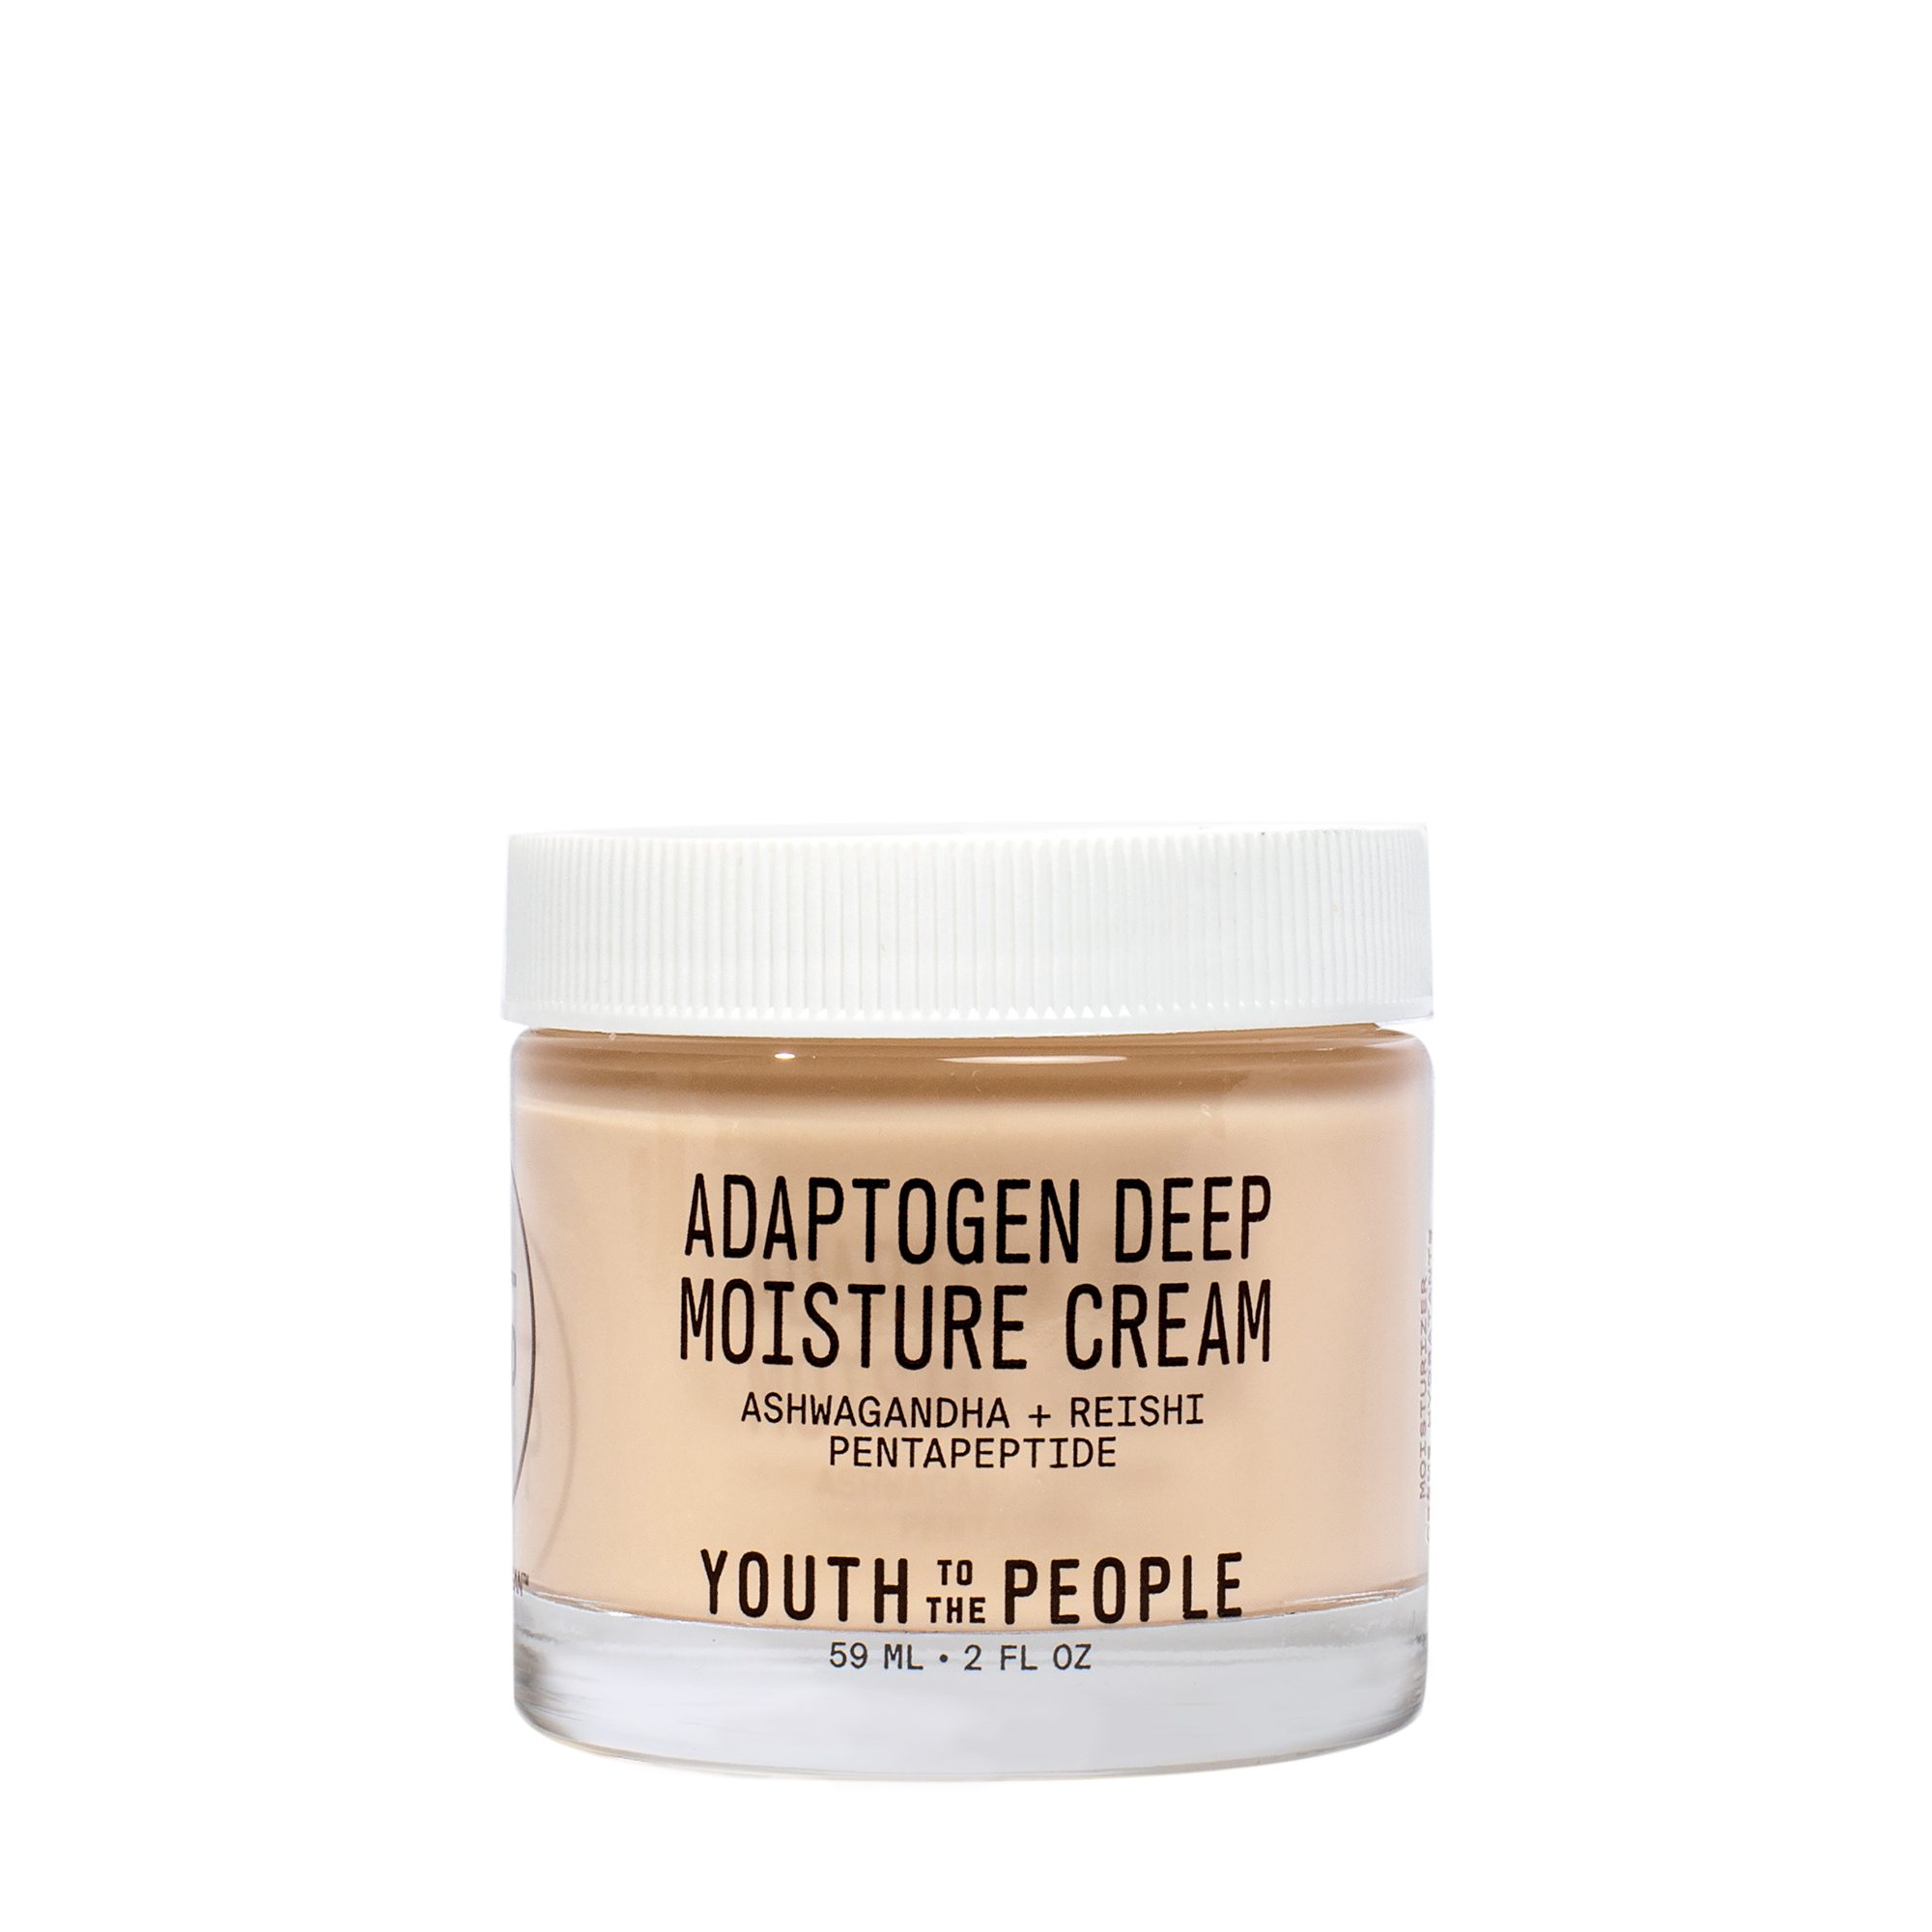 youth to the people moisture cream product